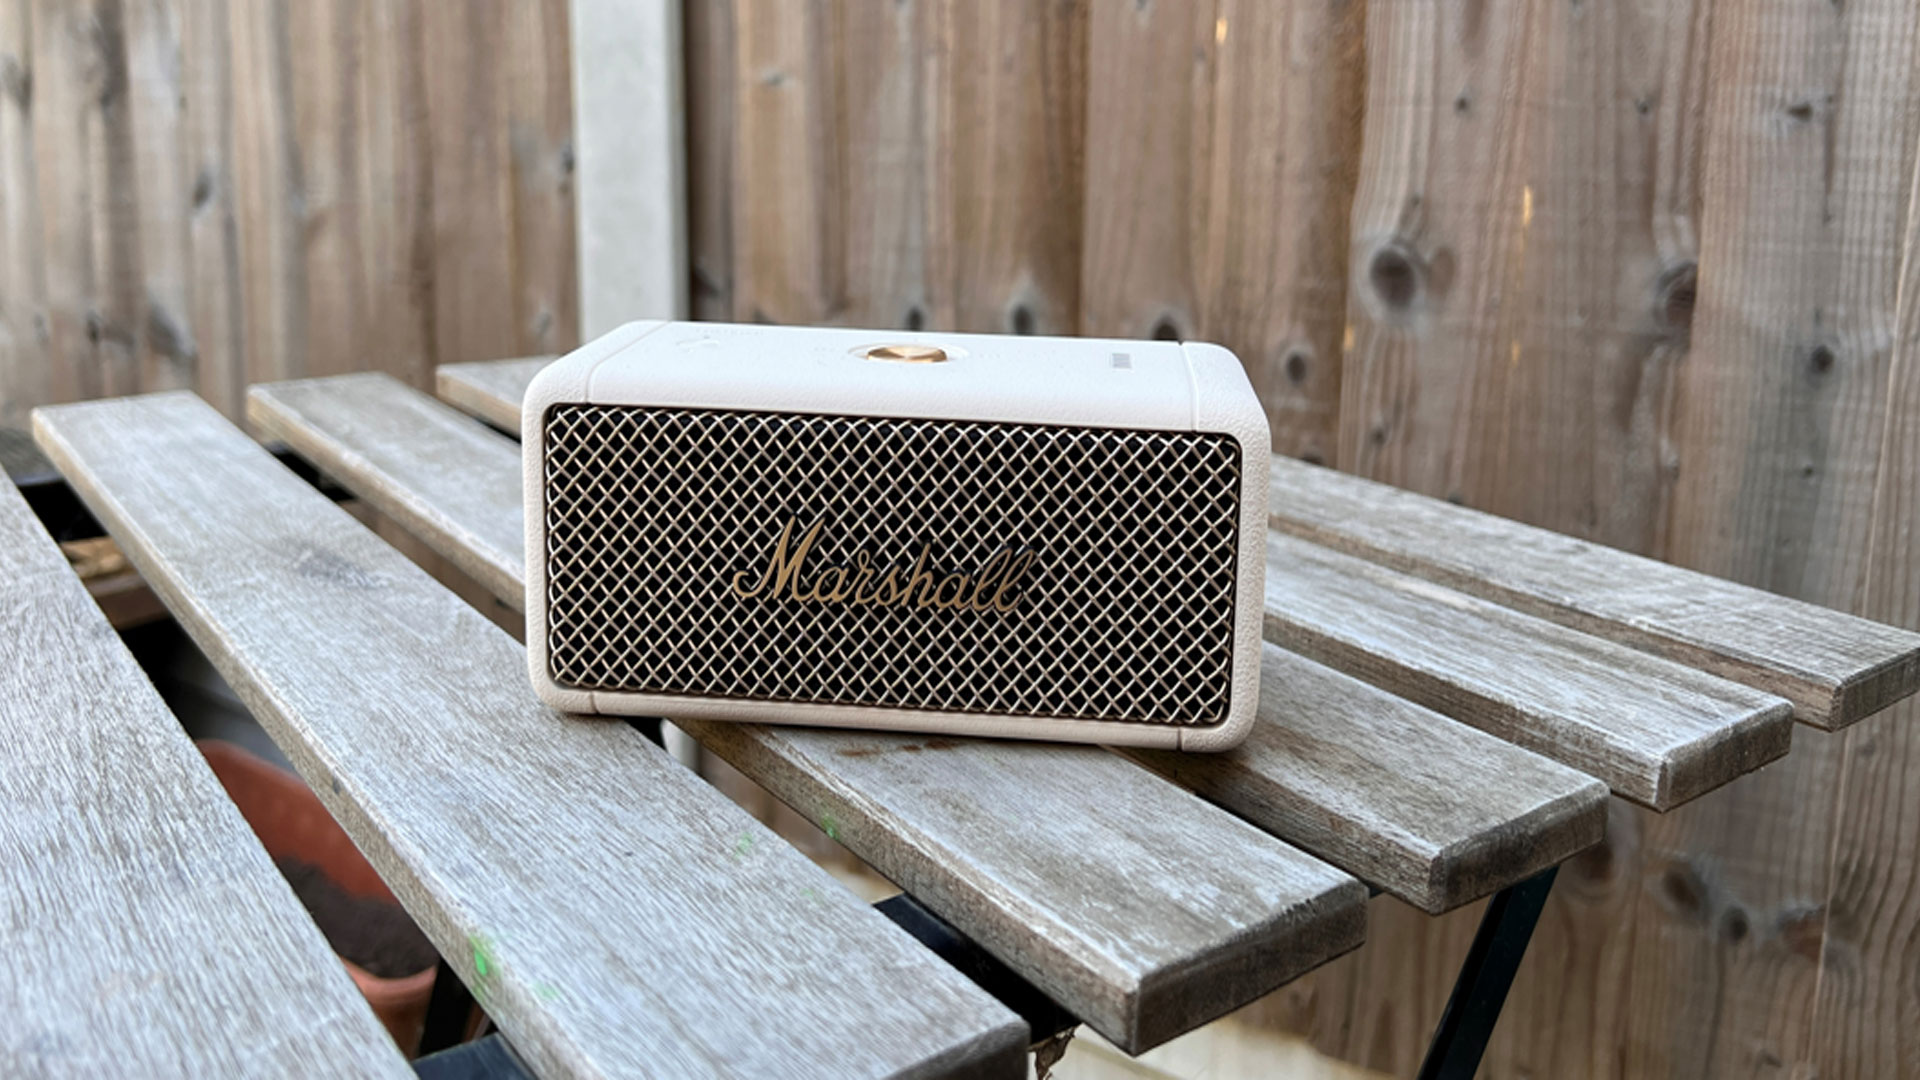 🎸 MARSHALL Emberton SPEAKER Review / The BEST bluetooth SPEAKER and  PORTABLE? 